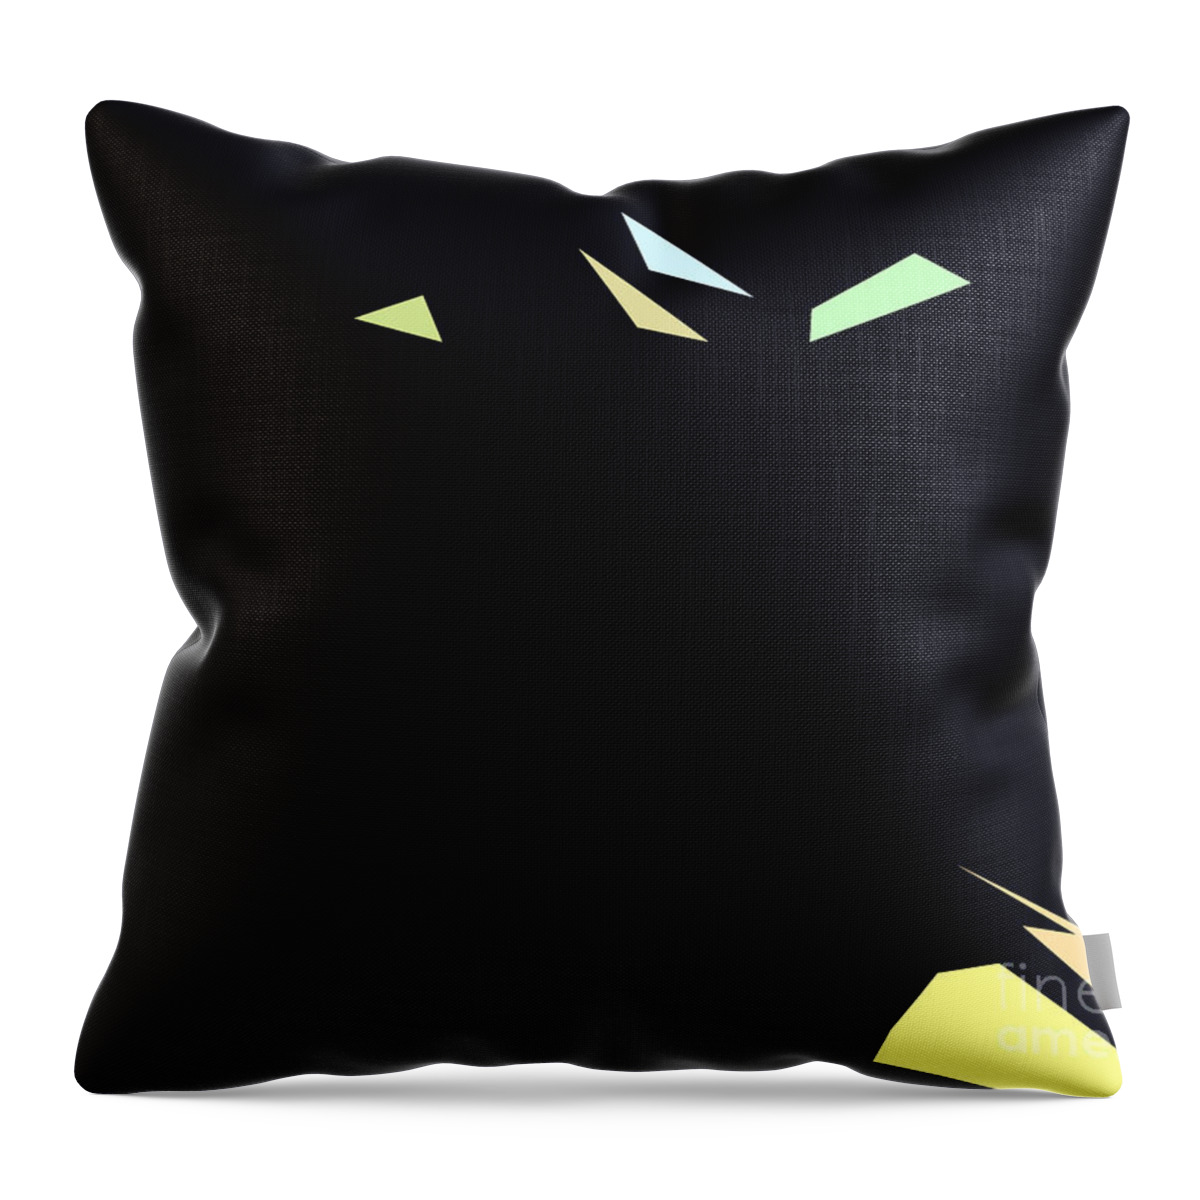 Graphic Throw Pillow featuring the digital art Geometric by Jacqueline Milner